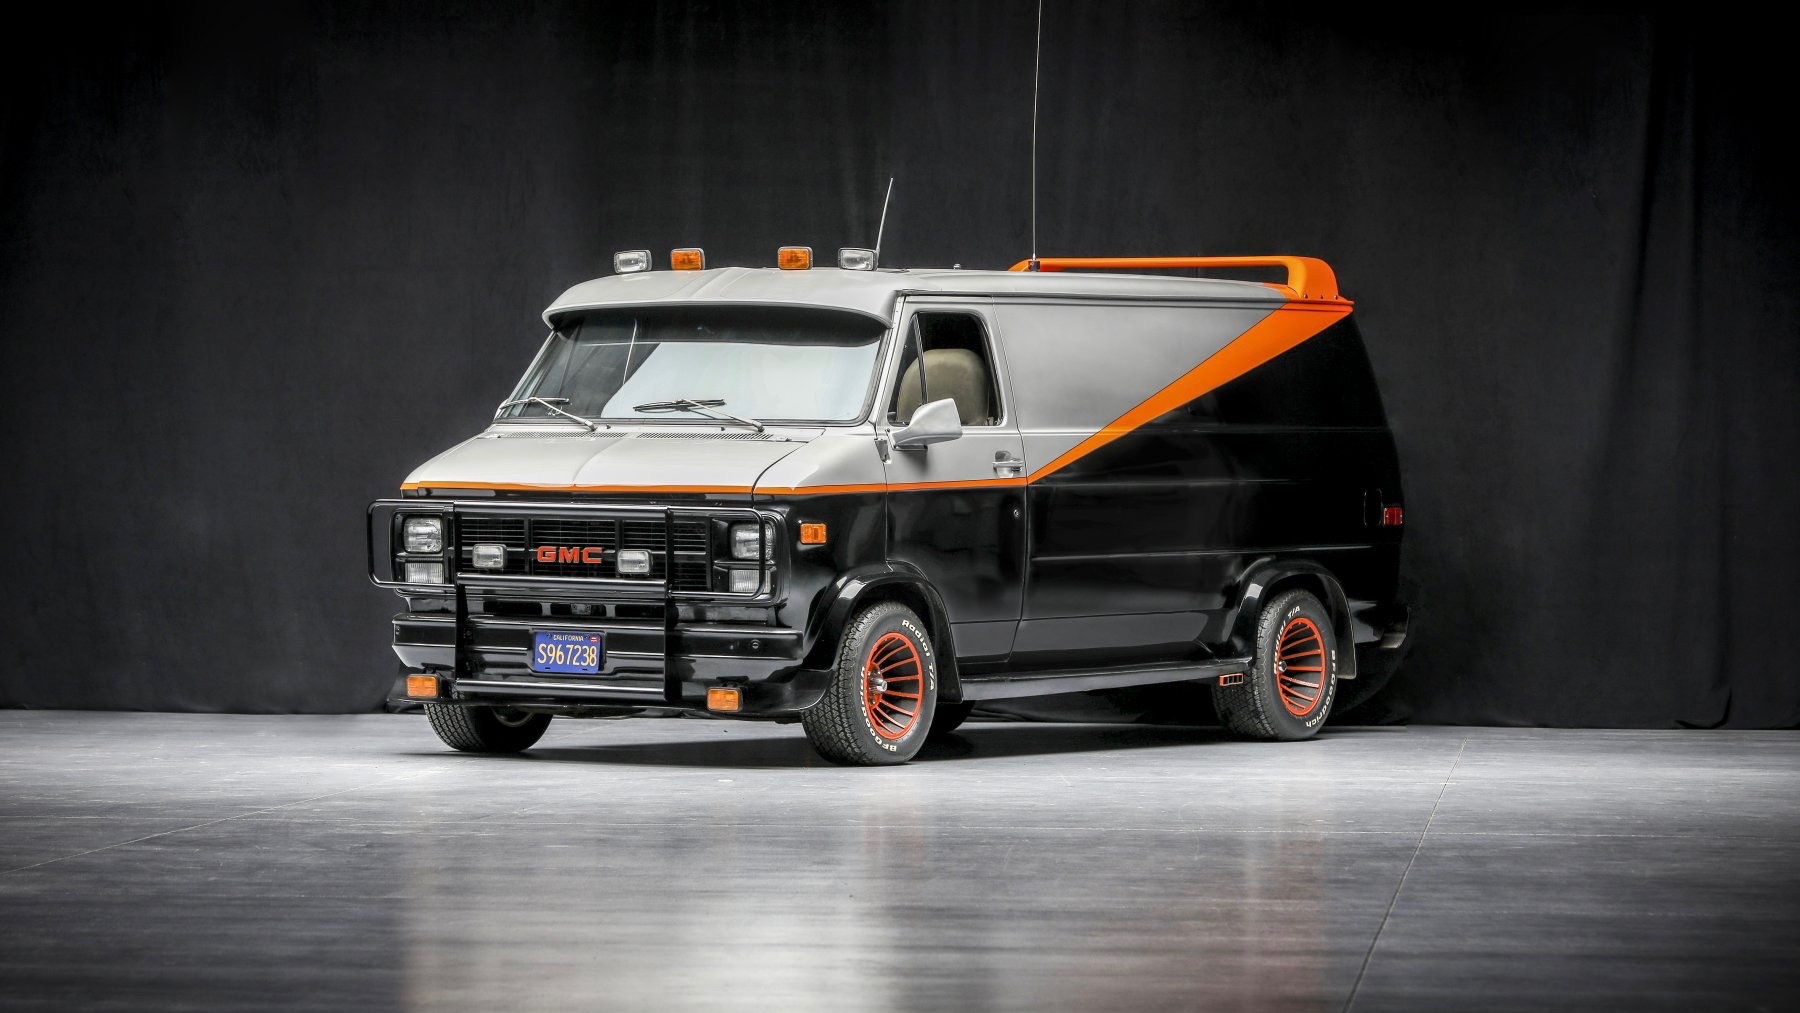 Officially licensed "A-Team" van (Photo by Worldwide Auctioneers)